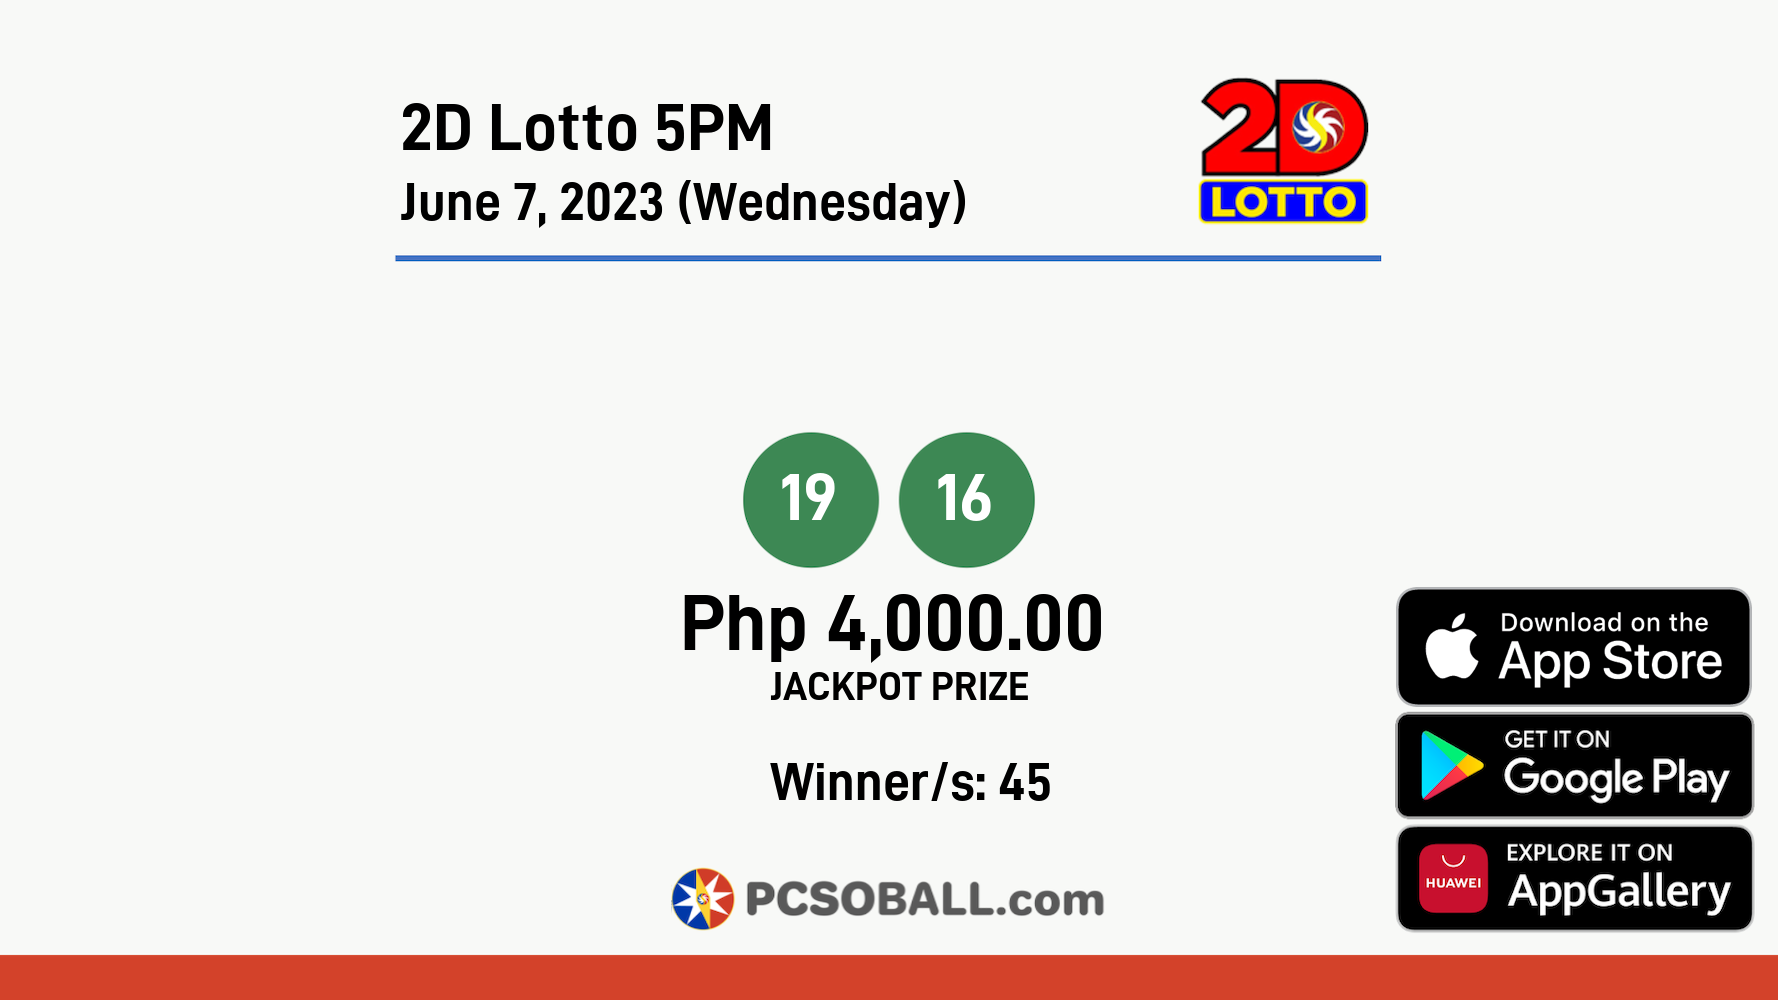 2D Lotto 5PM June 7, 2023 (Wednesday) Result